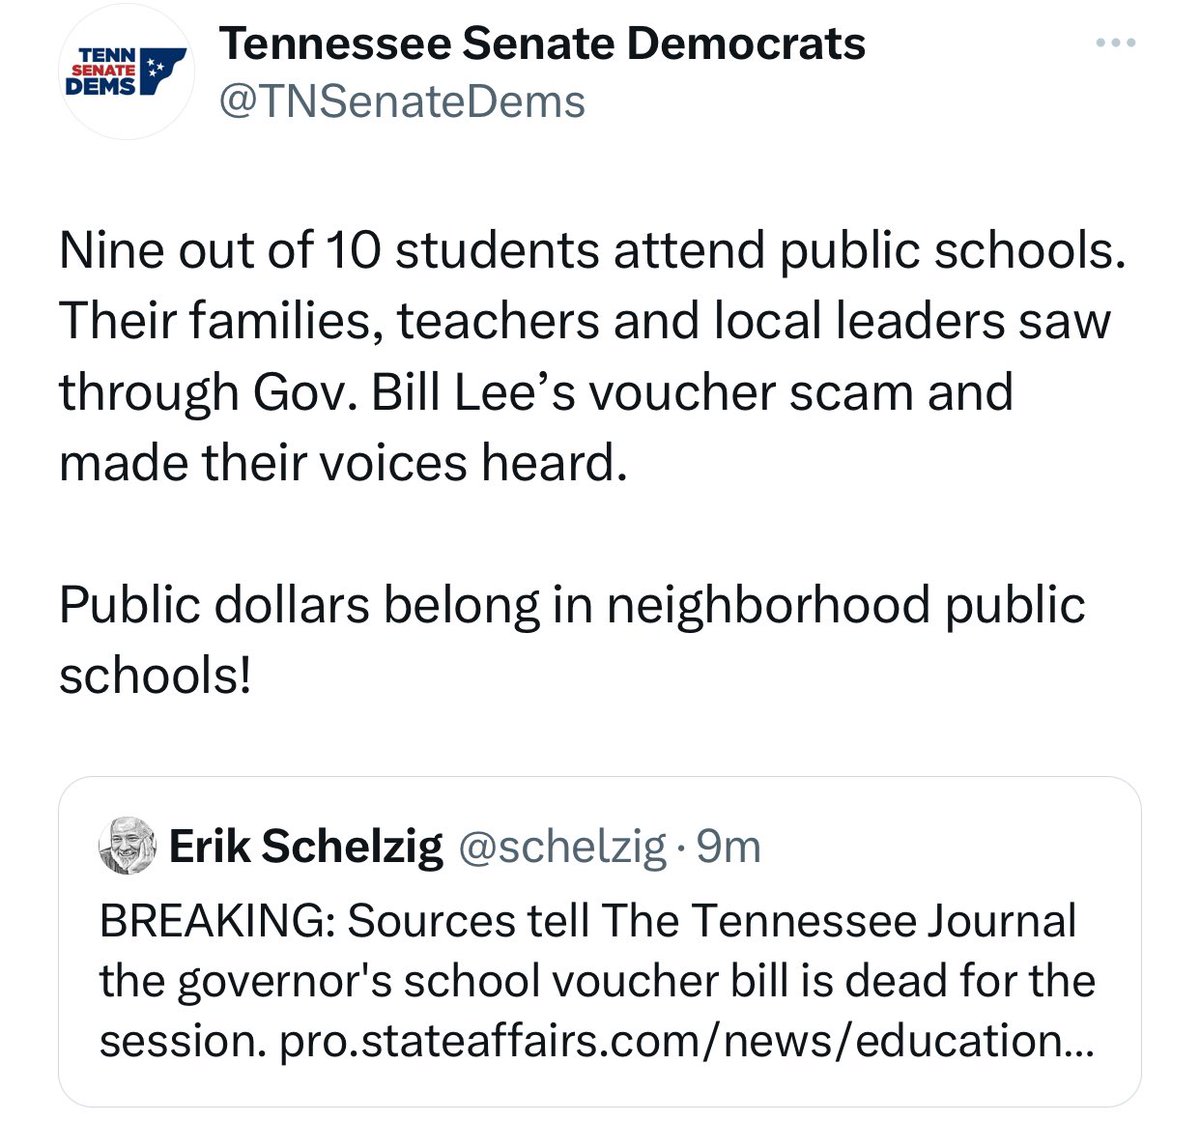 🚨 TENNESSEE UPDATE: Governor Lee’s voucher scam is reportedly dead Salute to all the parents, teachers, superintendents who spoke up. And the school boards and local officials who passed resolutions. You did it. You protected public schools. Give yourselves a hand 👏🏽